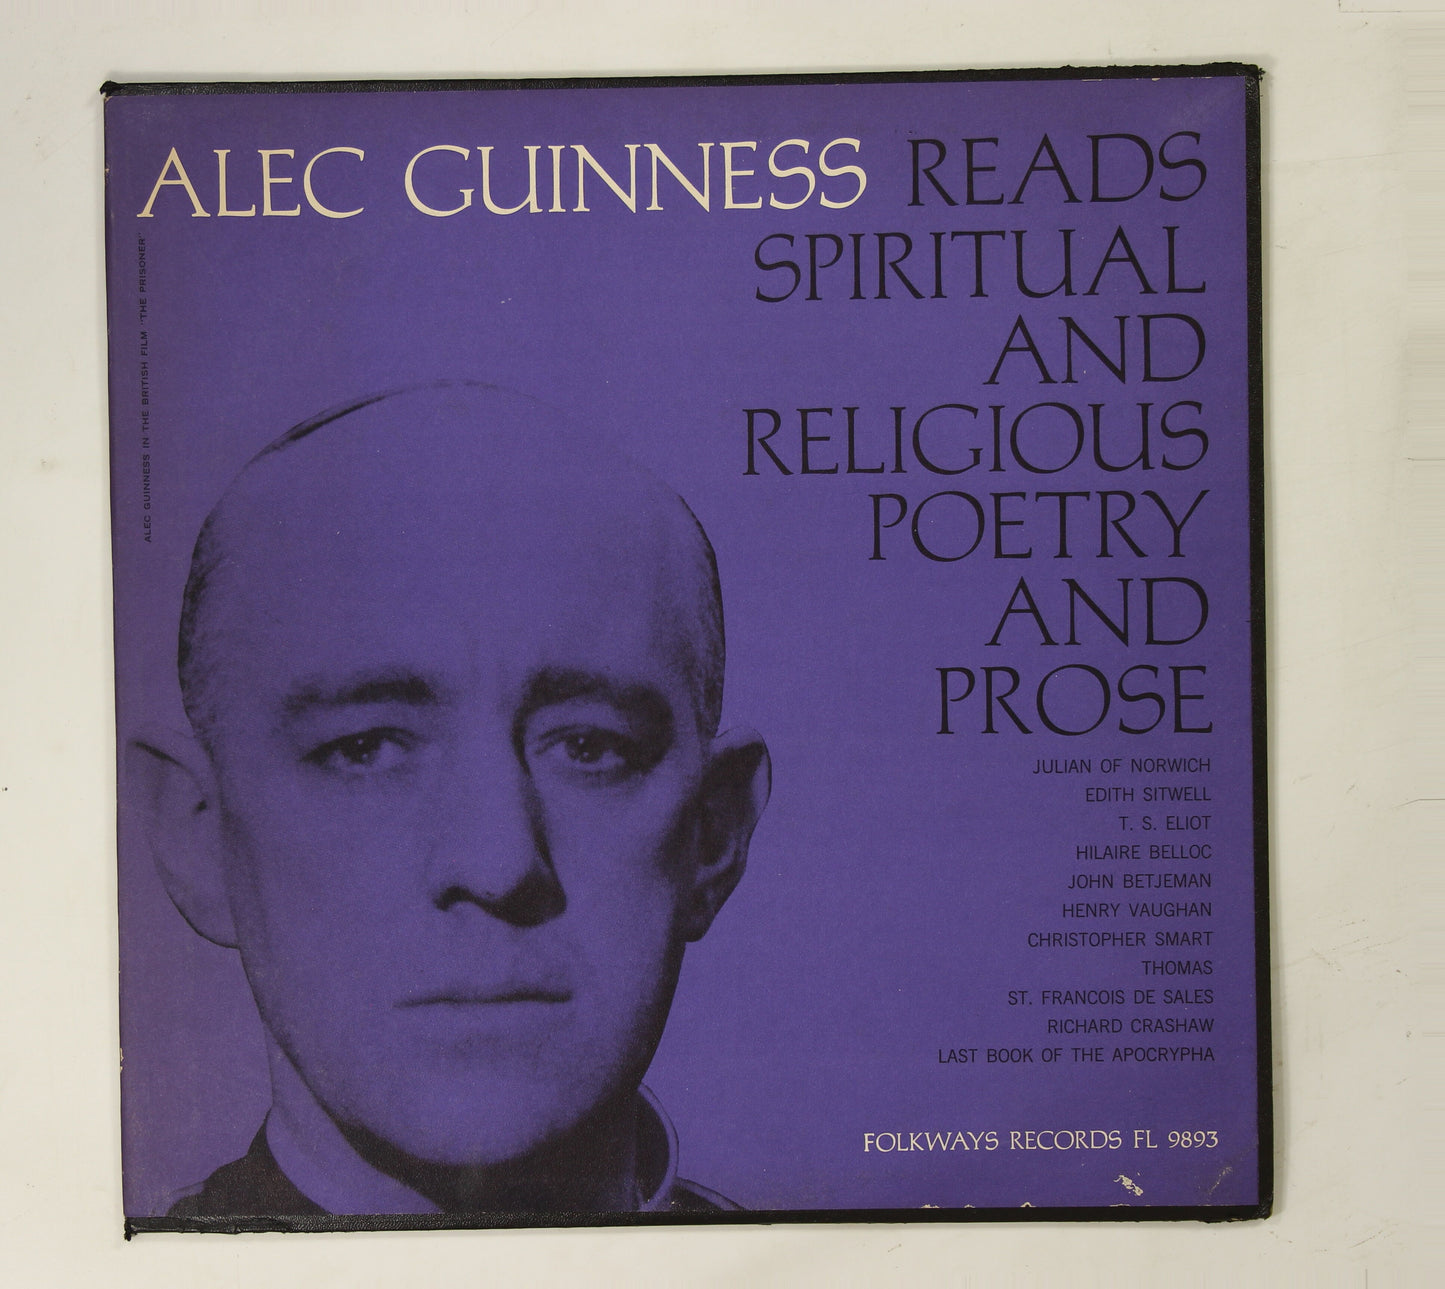 ALEC GUINNESS / READS SPIRITUAL AND RELIGIOUS POETRY AND PROSE